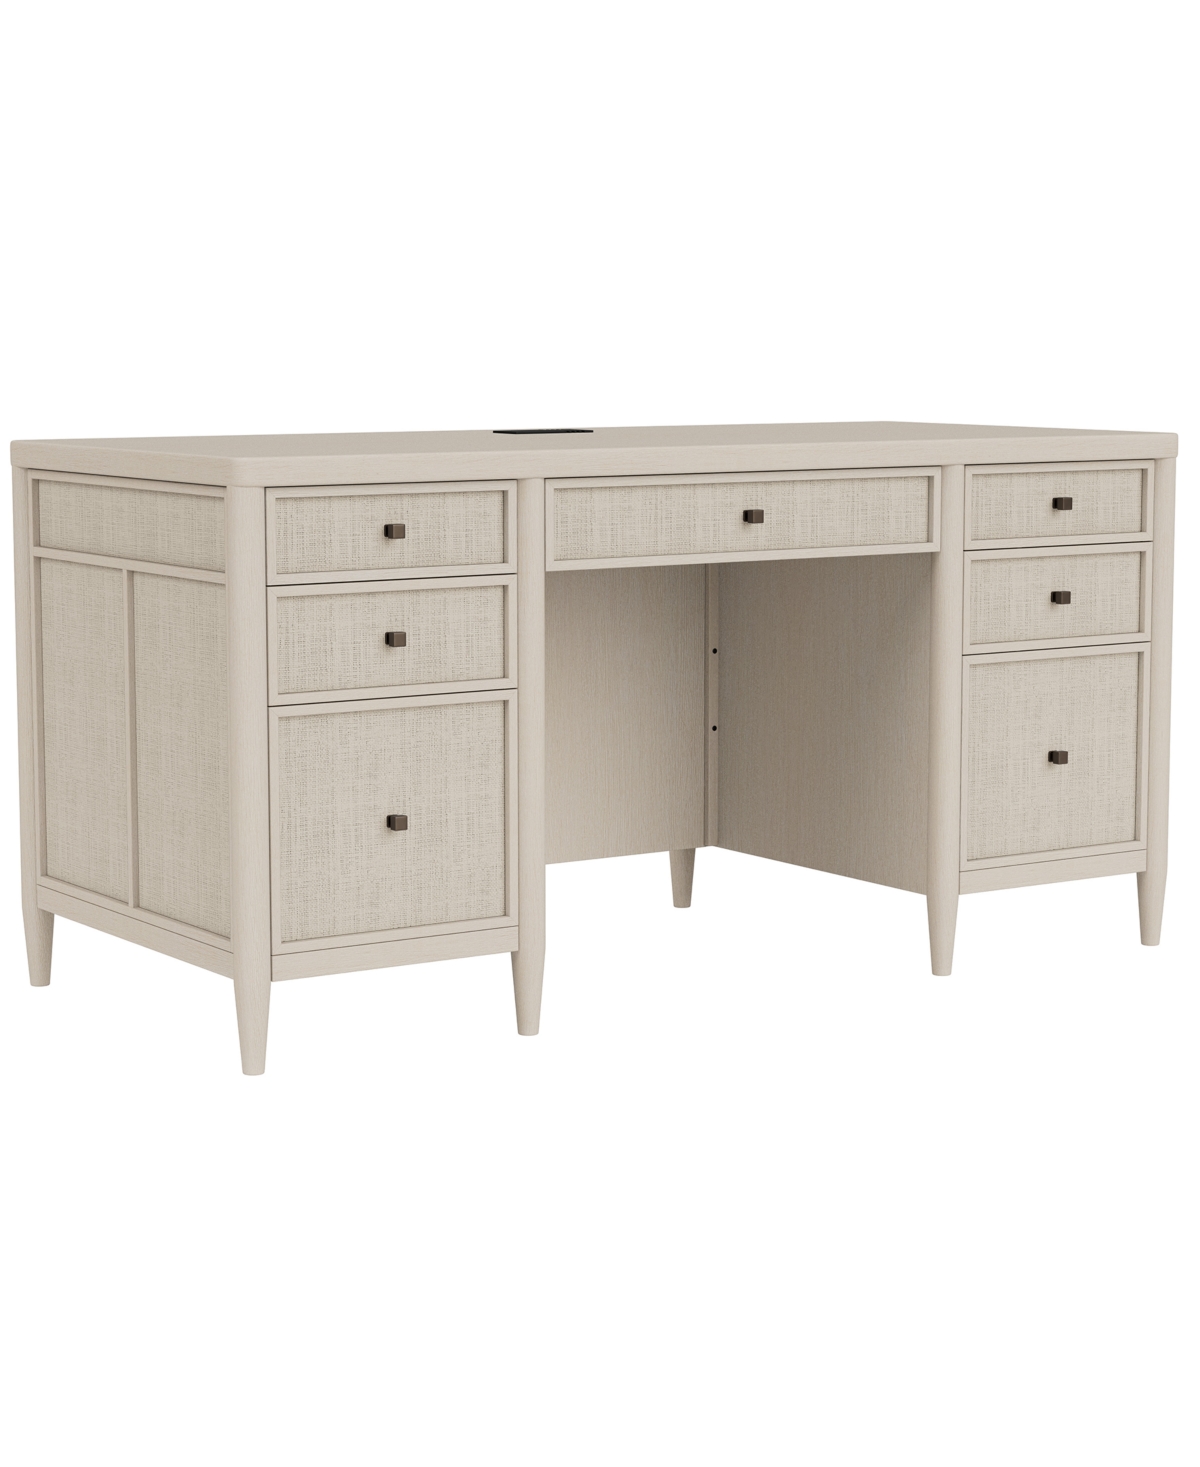 Furniture Maren 62" Wood Dovetail Joinery Executive Desk In White Sand